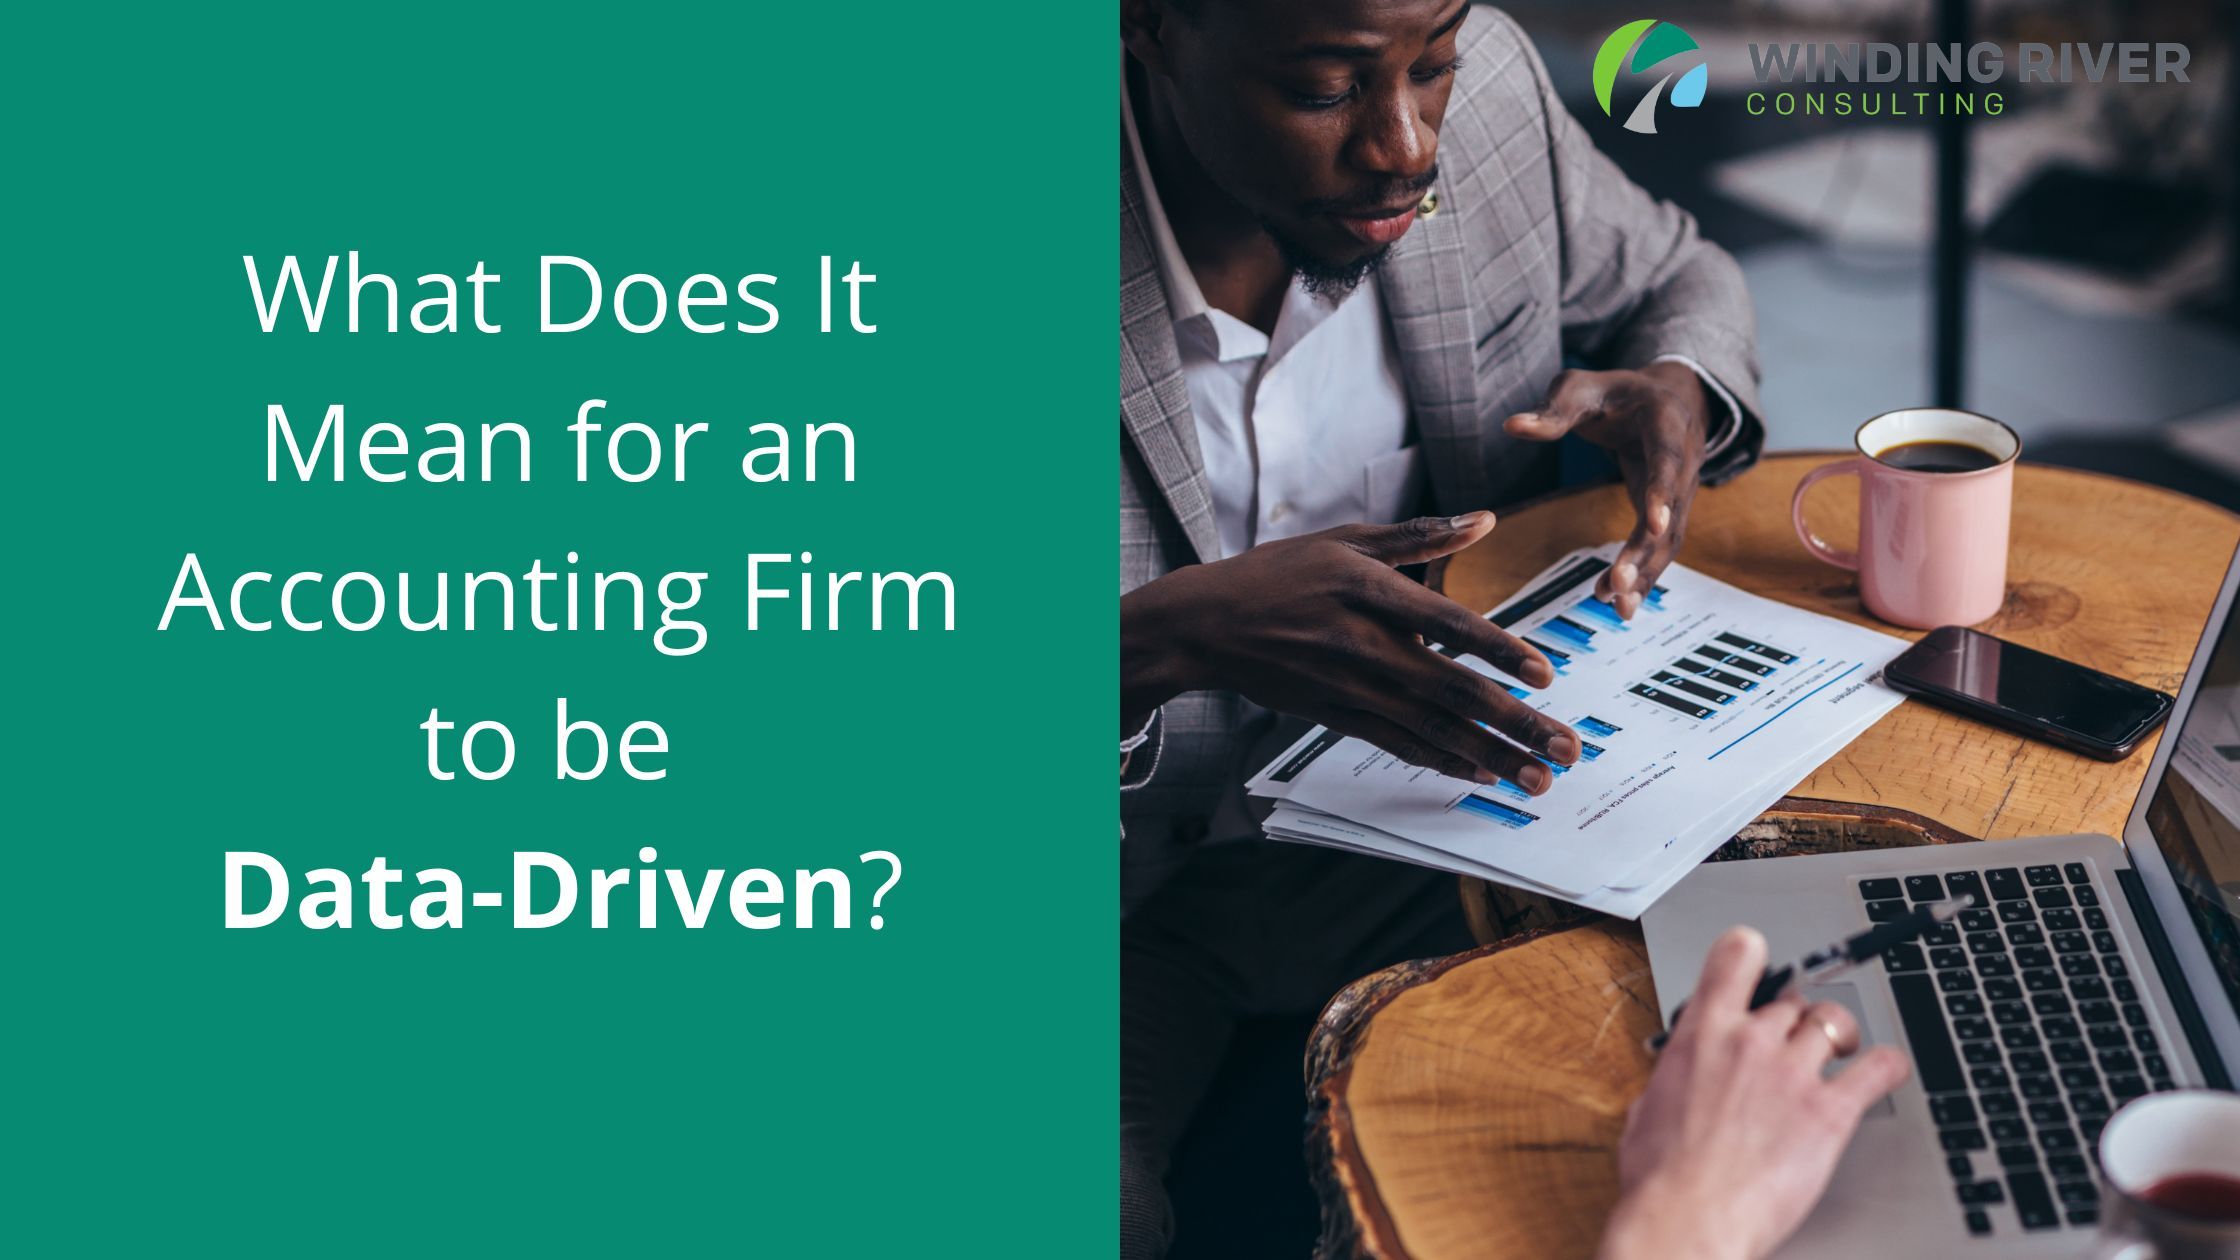 What Does It Mean for an Accounting Firm to be Data-Driven?